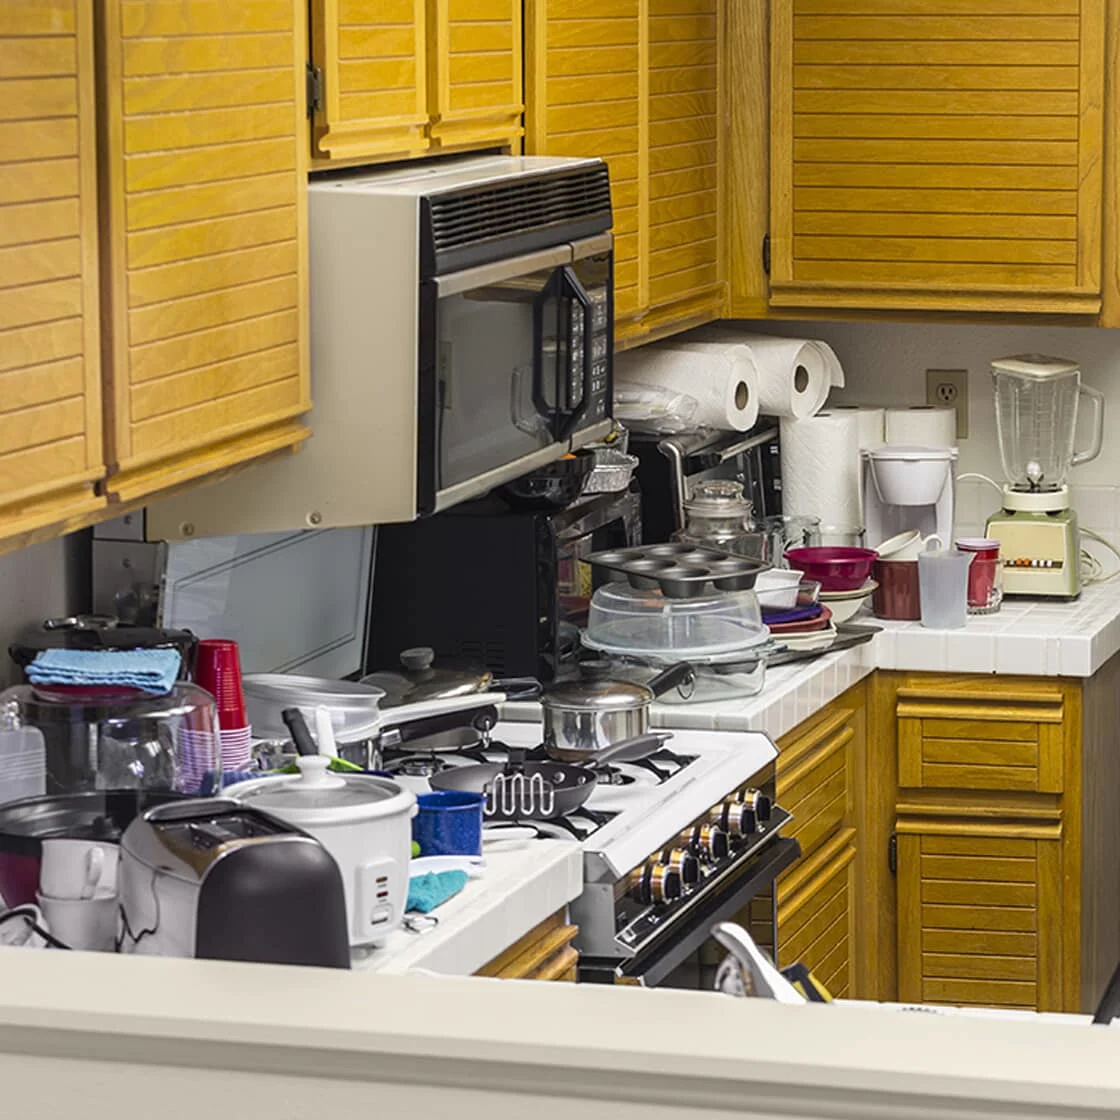 Cluttered kitchen space